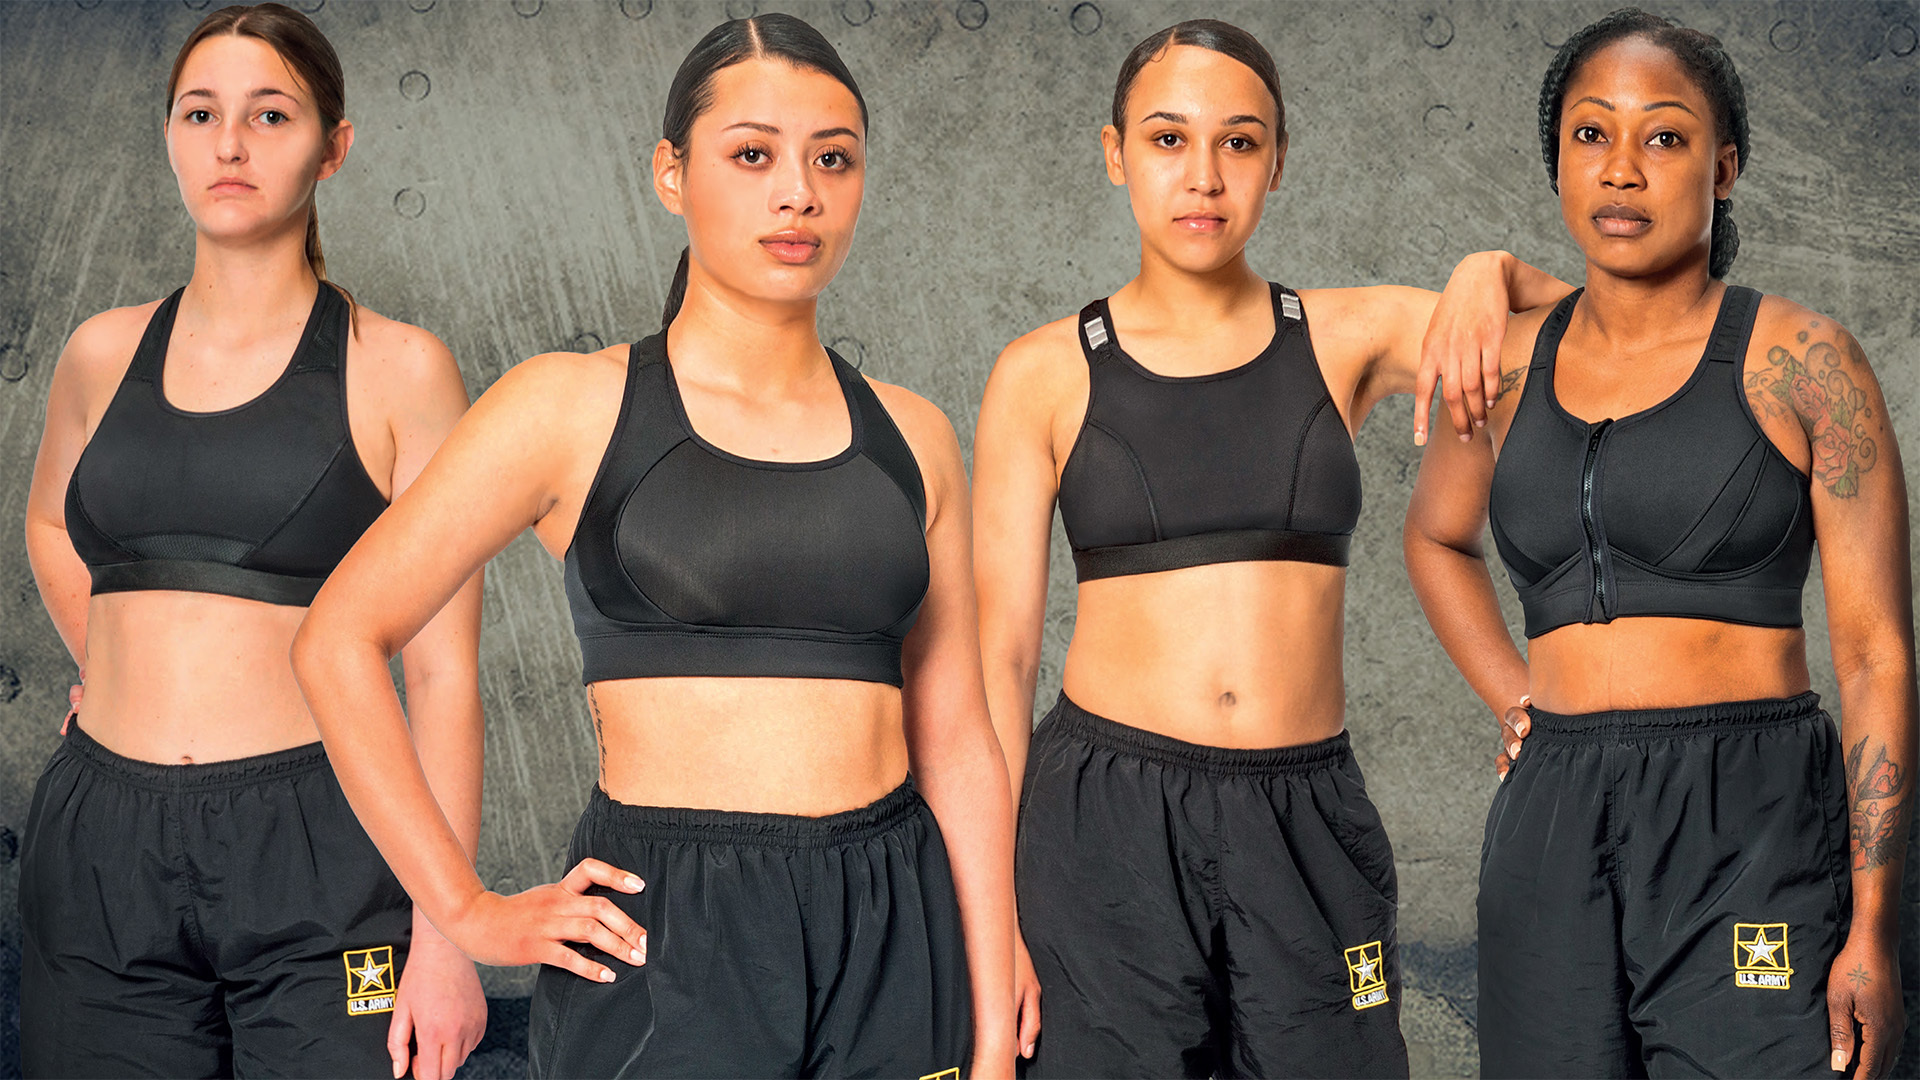 US Army tests tactical bra for female soldiers - Task & Purpose